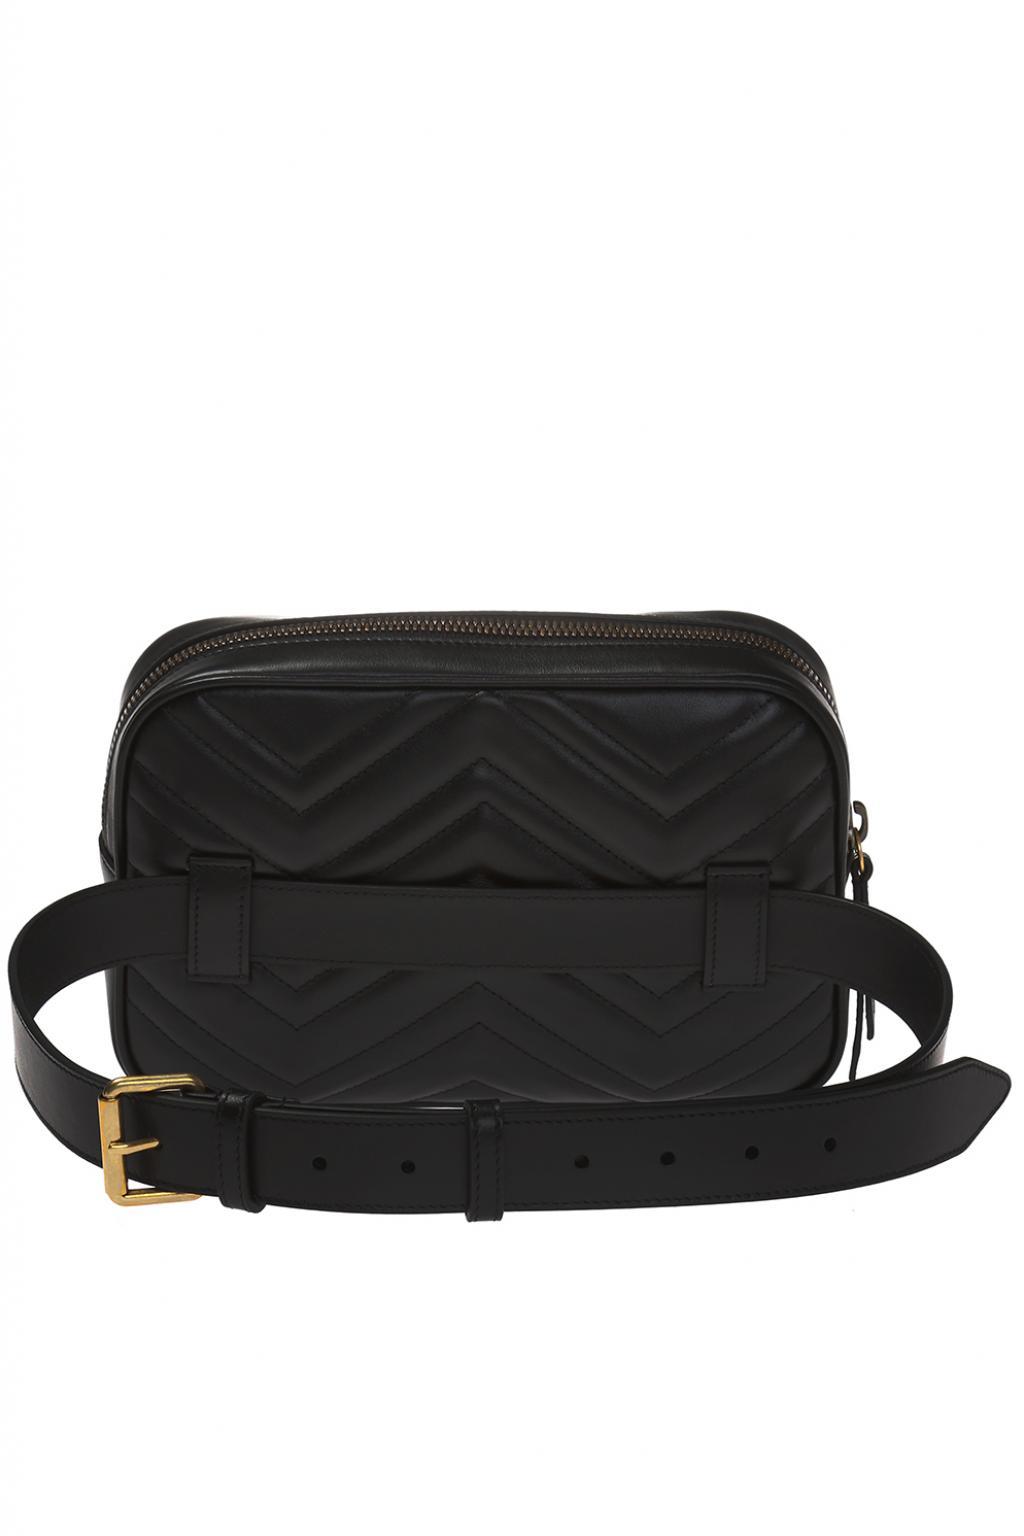 Gucci Leather &#39;GG Marmont&#39; Belt Bag With Logo in Black for Men - Lyst